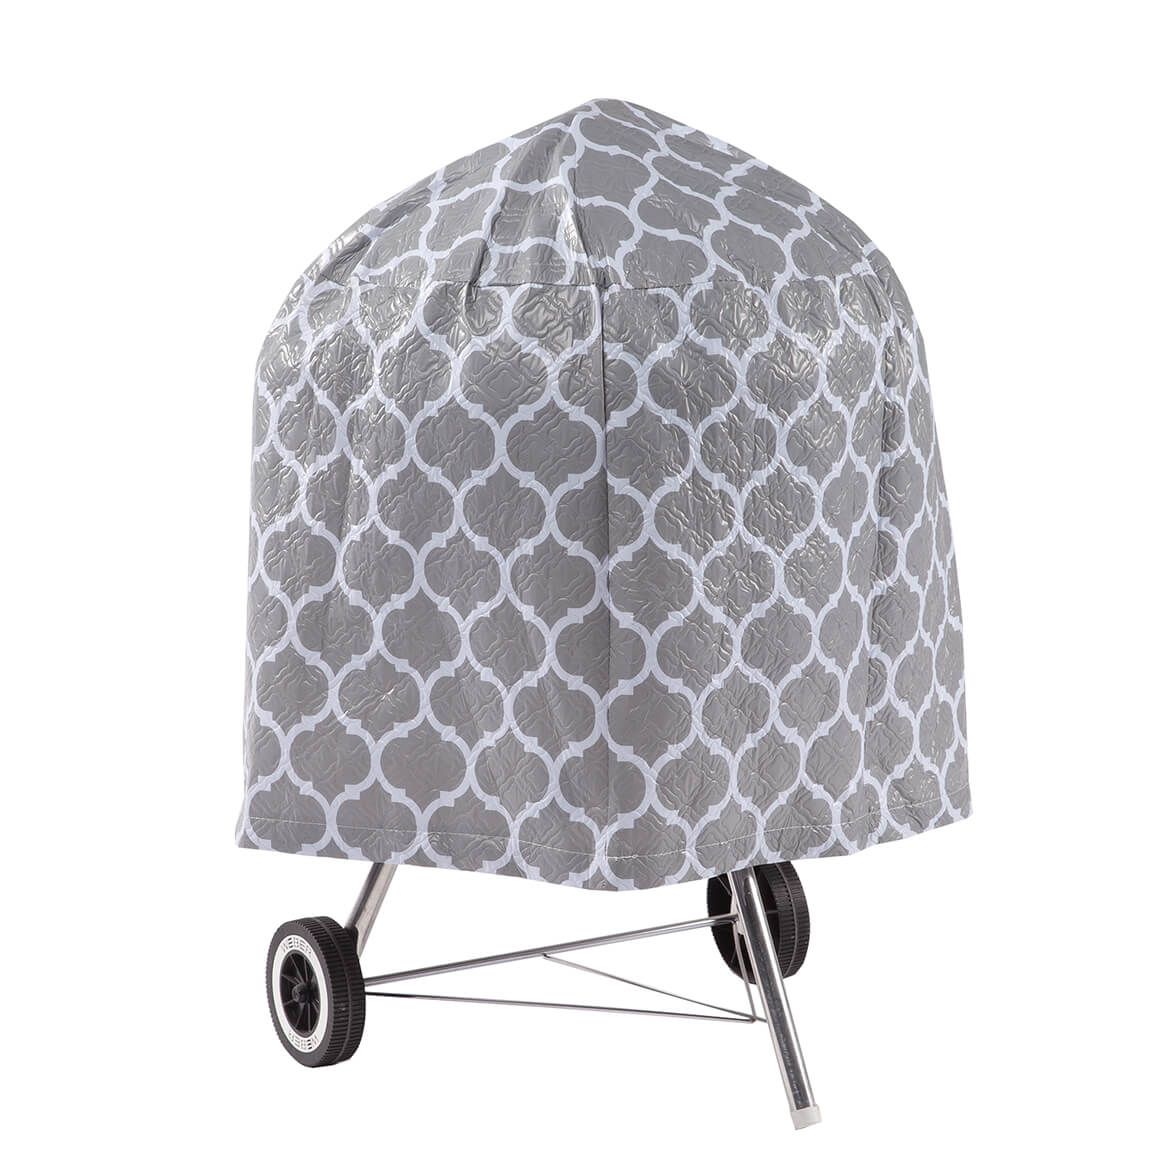 Trellis Pattern Quilted Kettle Style Grill Cover, 23"H x 27" + '-' + 362888